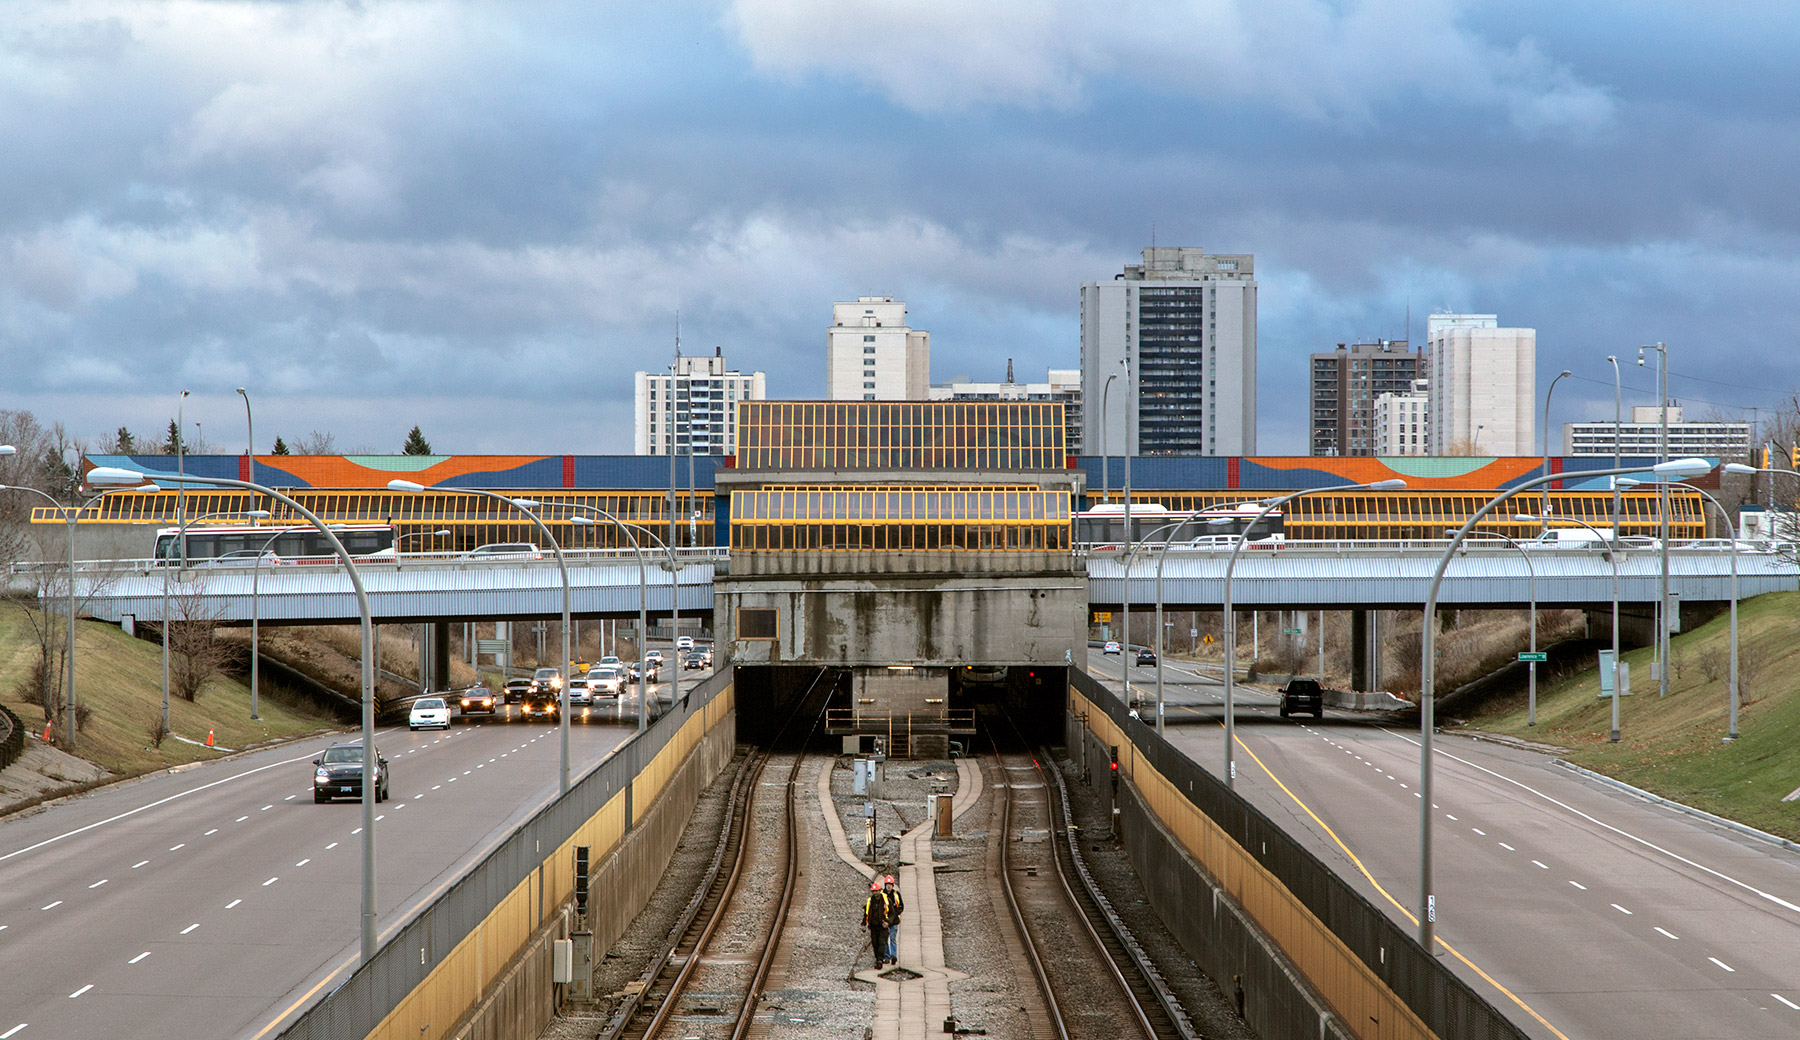 20150104. A south view of Toronto's Lawrence West subway station